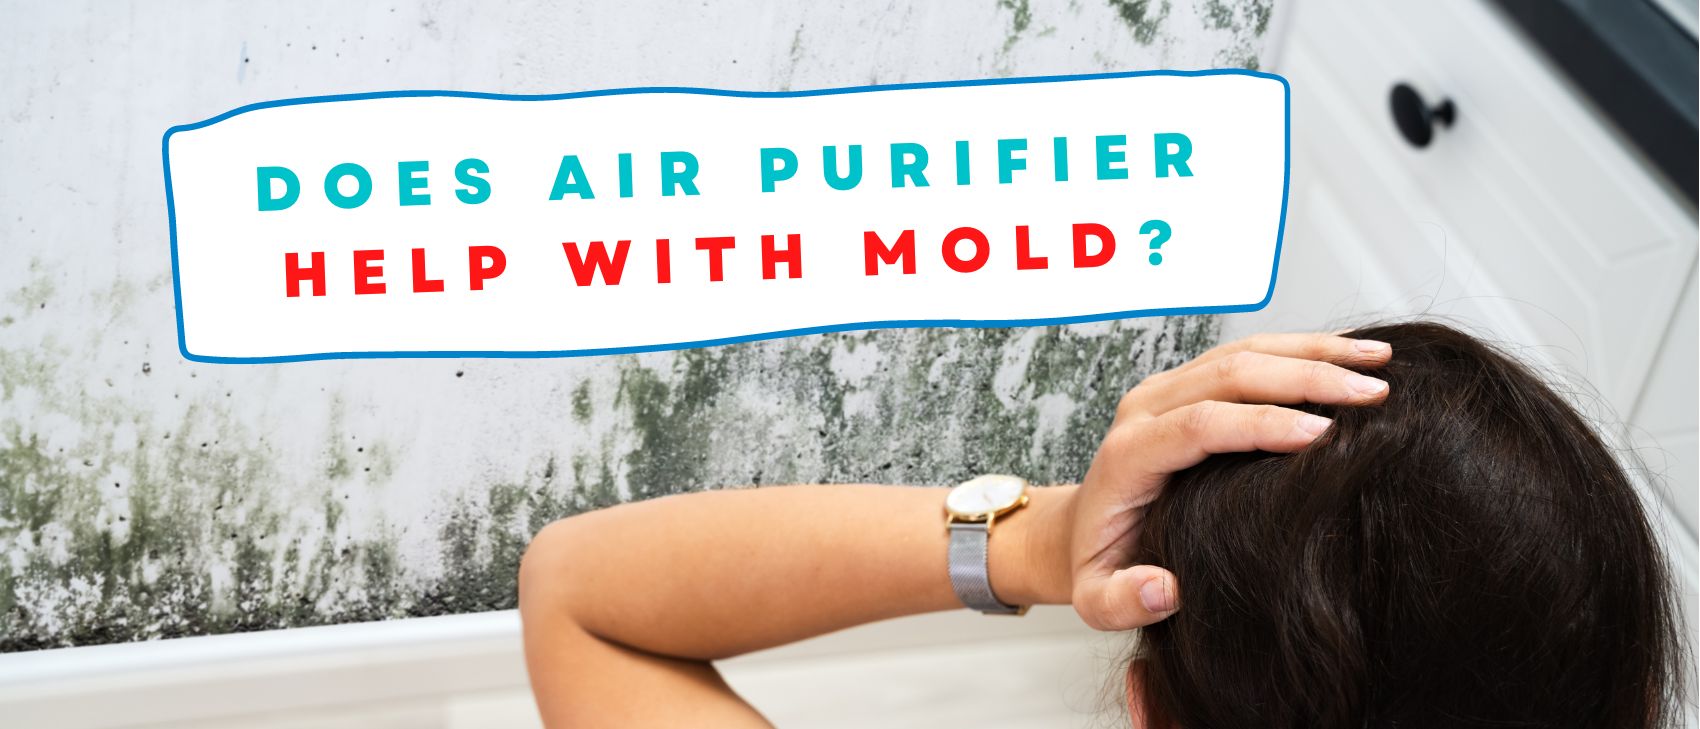 Does Air Purifier Help With Mold?